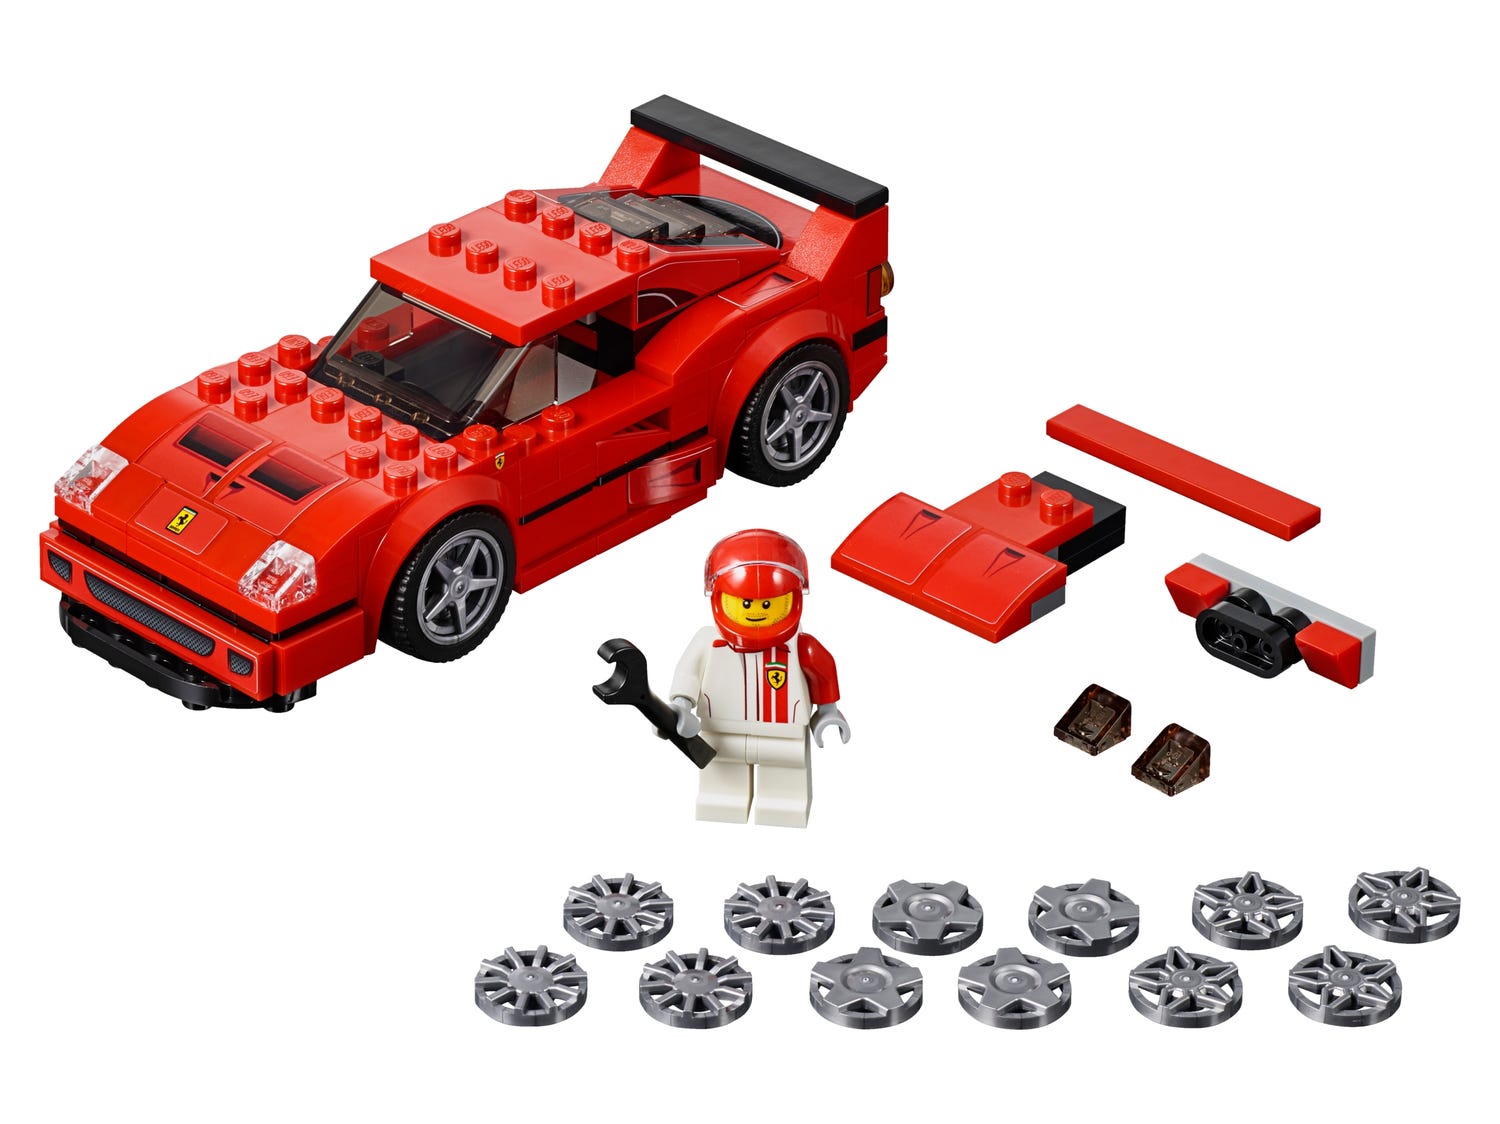 Ferrari F40 Competizione 75890 | Speed Champions | Buy online at the  Official LEGO® Shop US